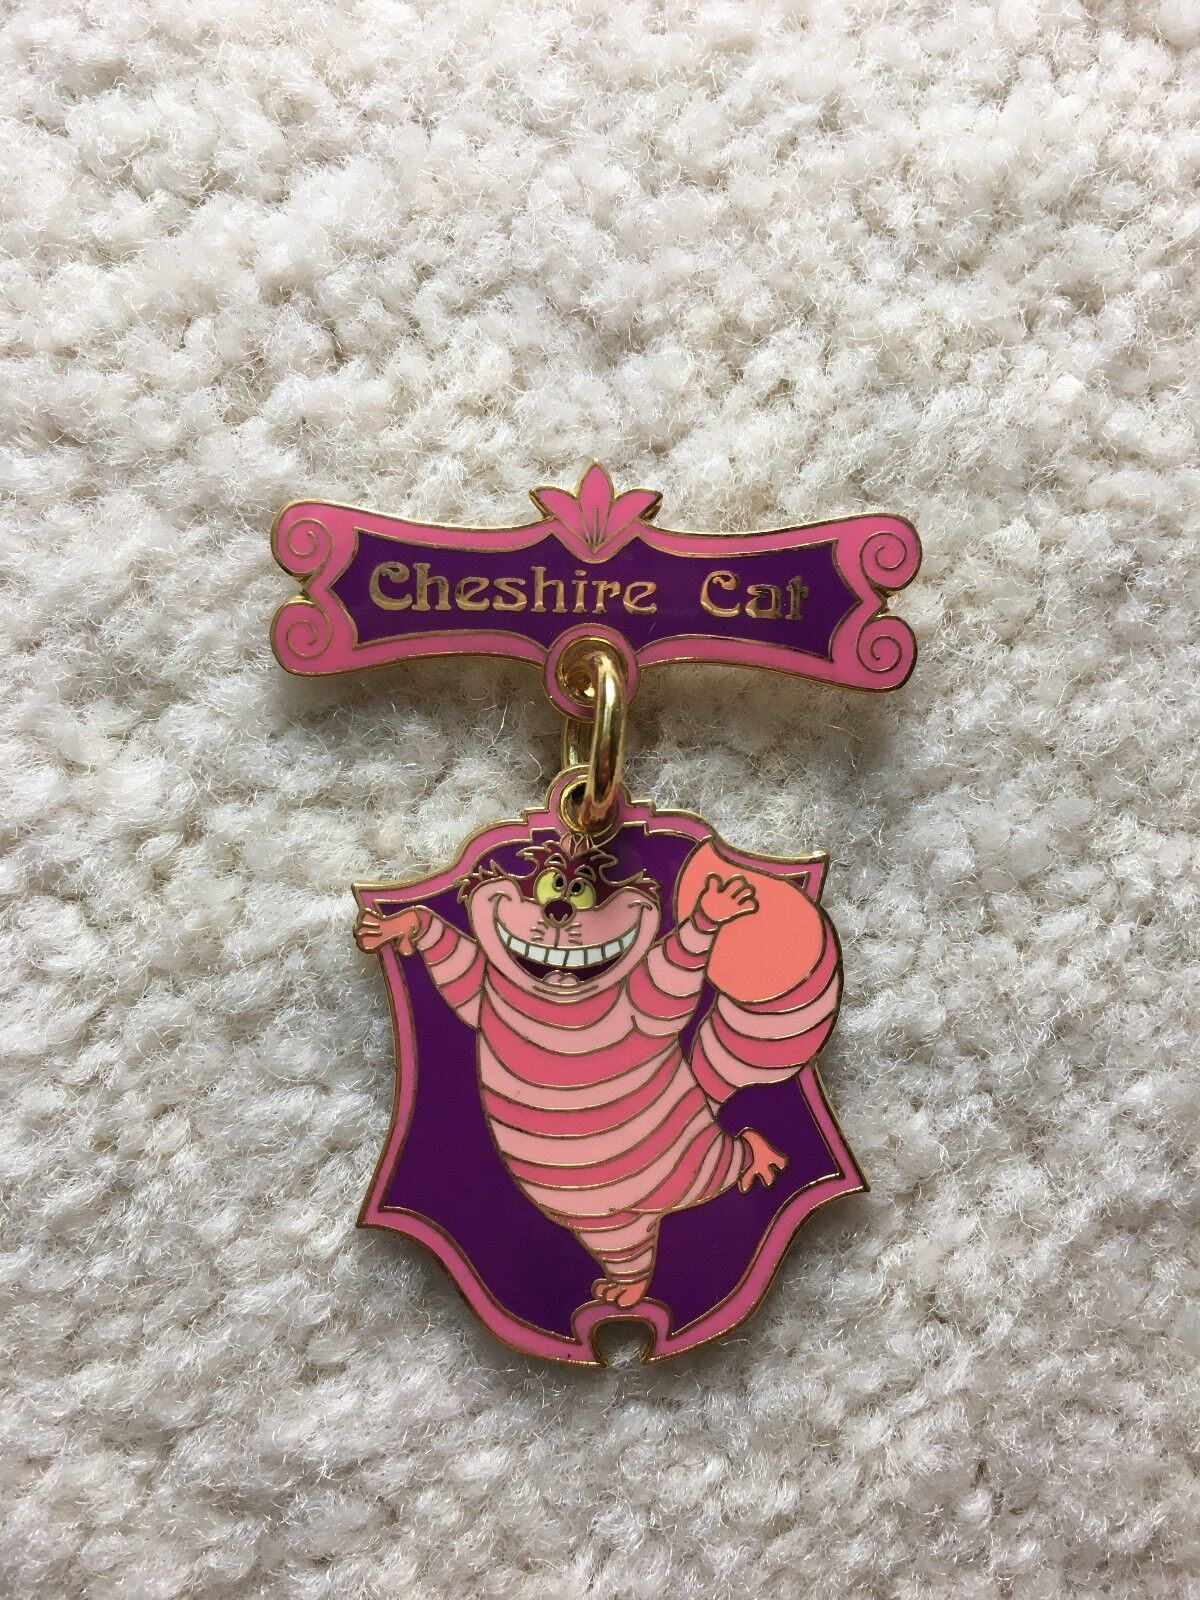 RARE Disney Auctions Cheshire Cat Dangle Hanging Charm Pin LE 500